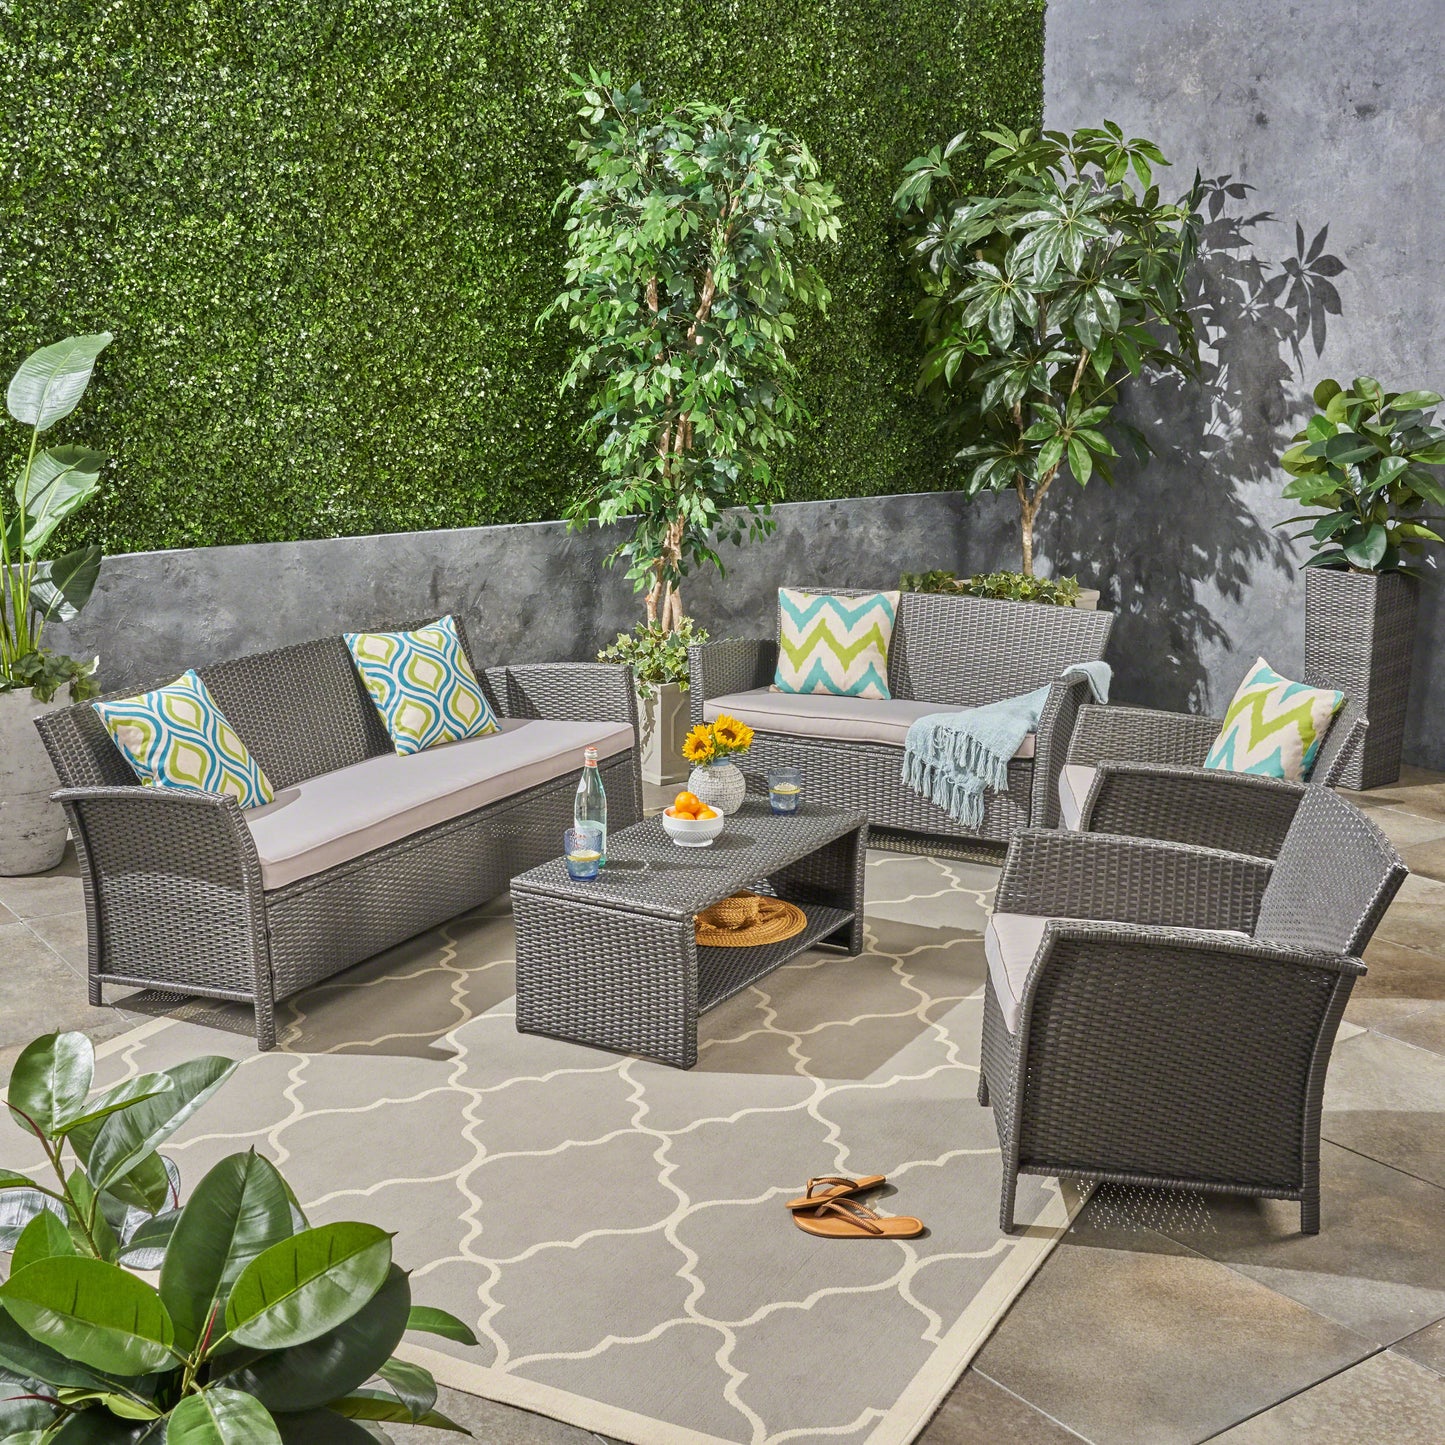 Lucia Outdoor 7 Seater Wicker Chat Set